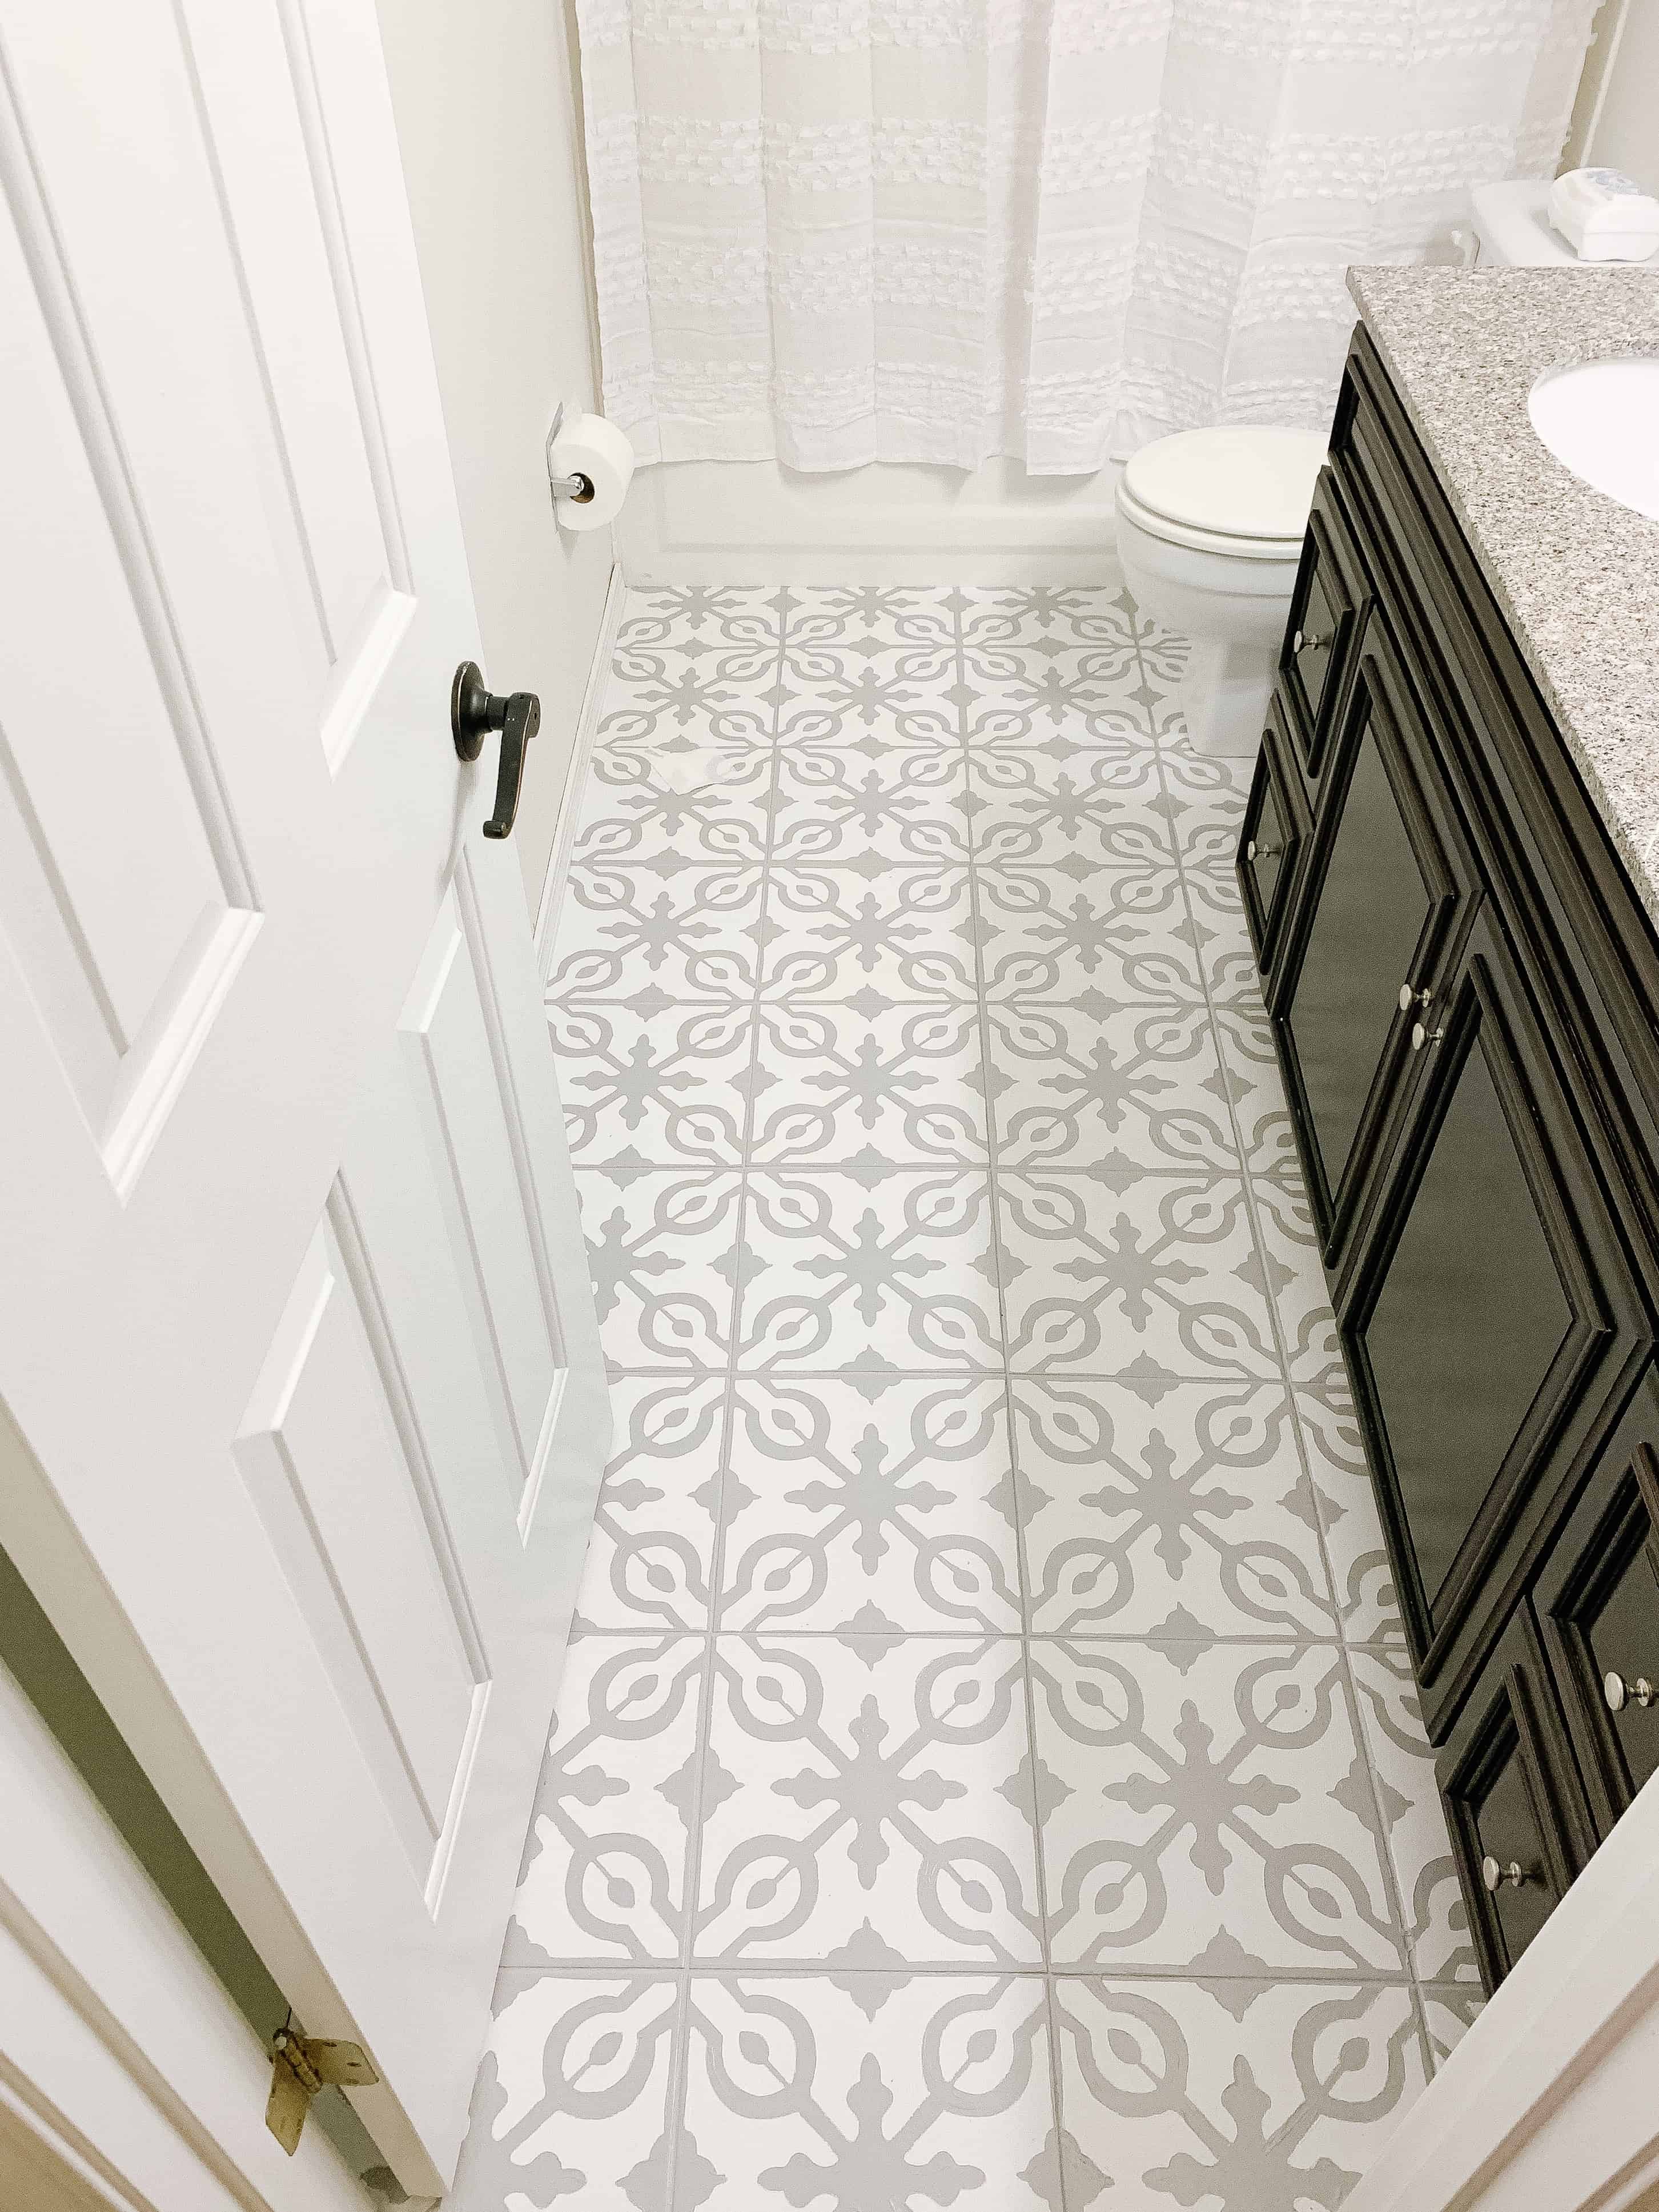 How To Paint Tile Floors, How To Paint Ceramic Floor Tile